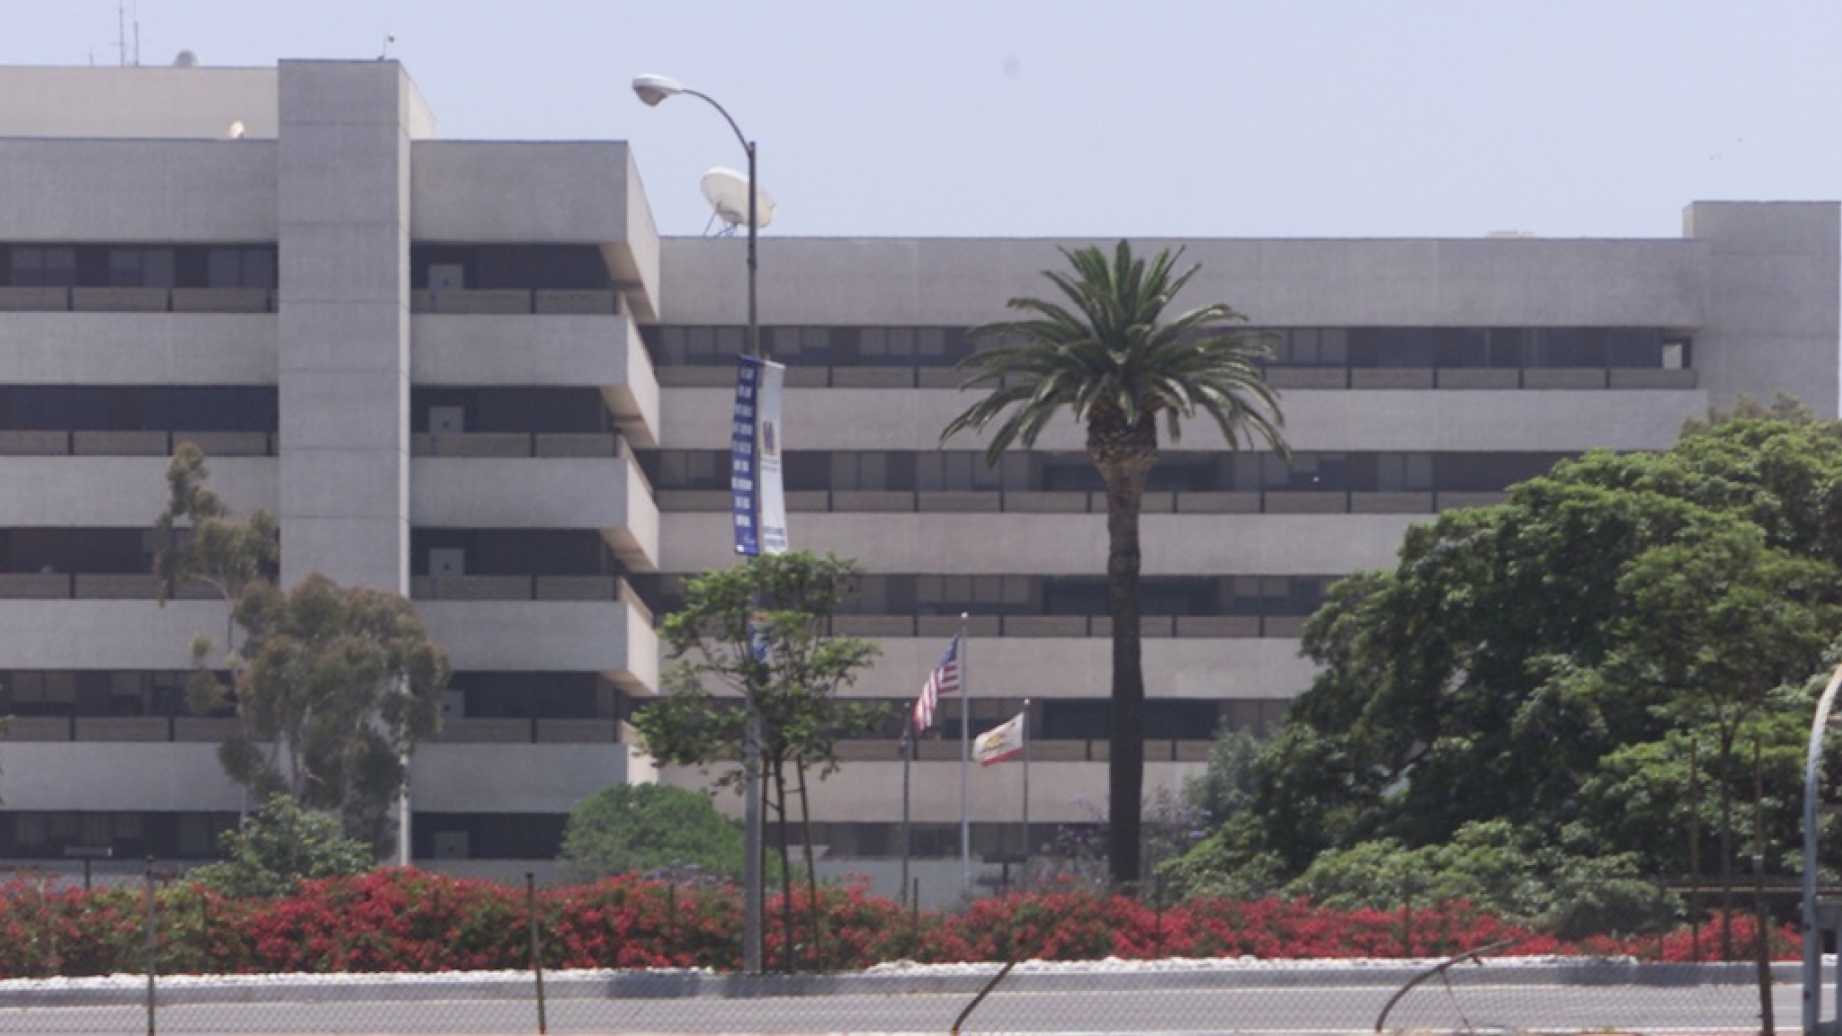 The VA Hospital In L.A. Has Cancelled 83 Surgeries Due To A Fly Infestation In Operating Rooms